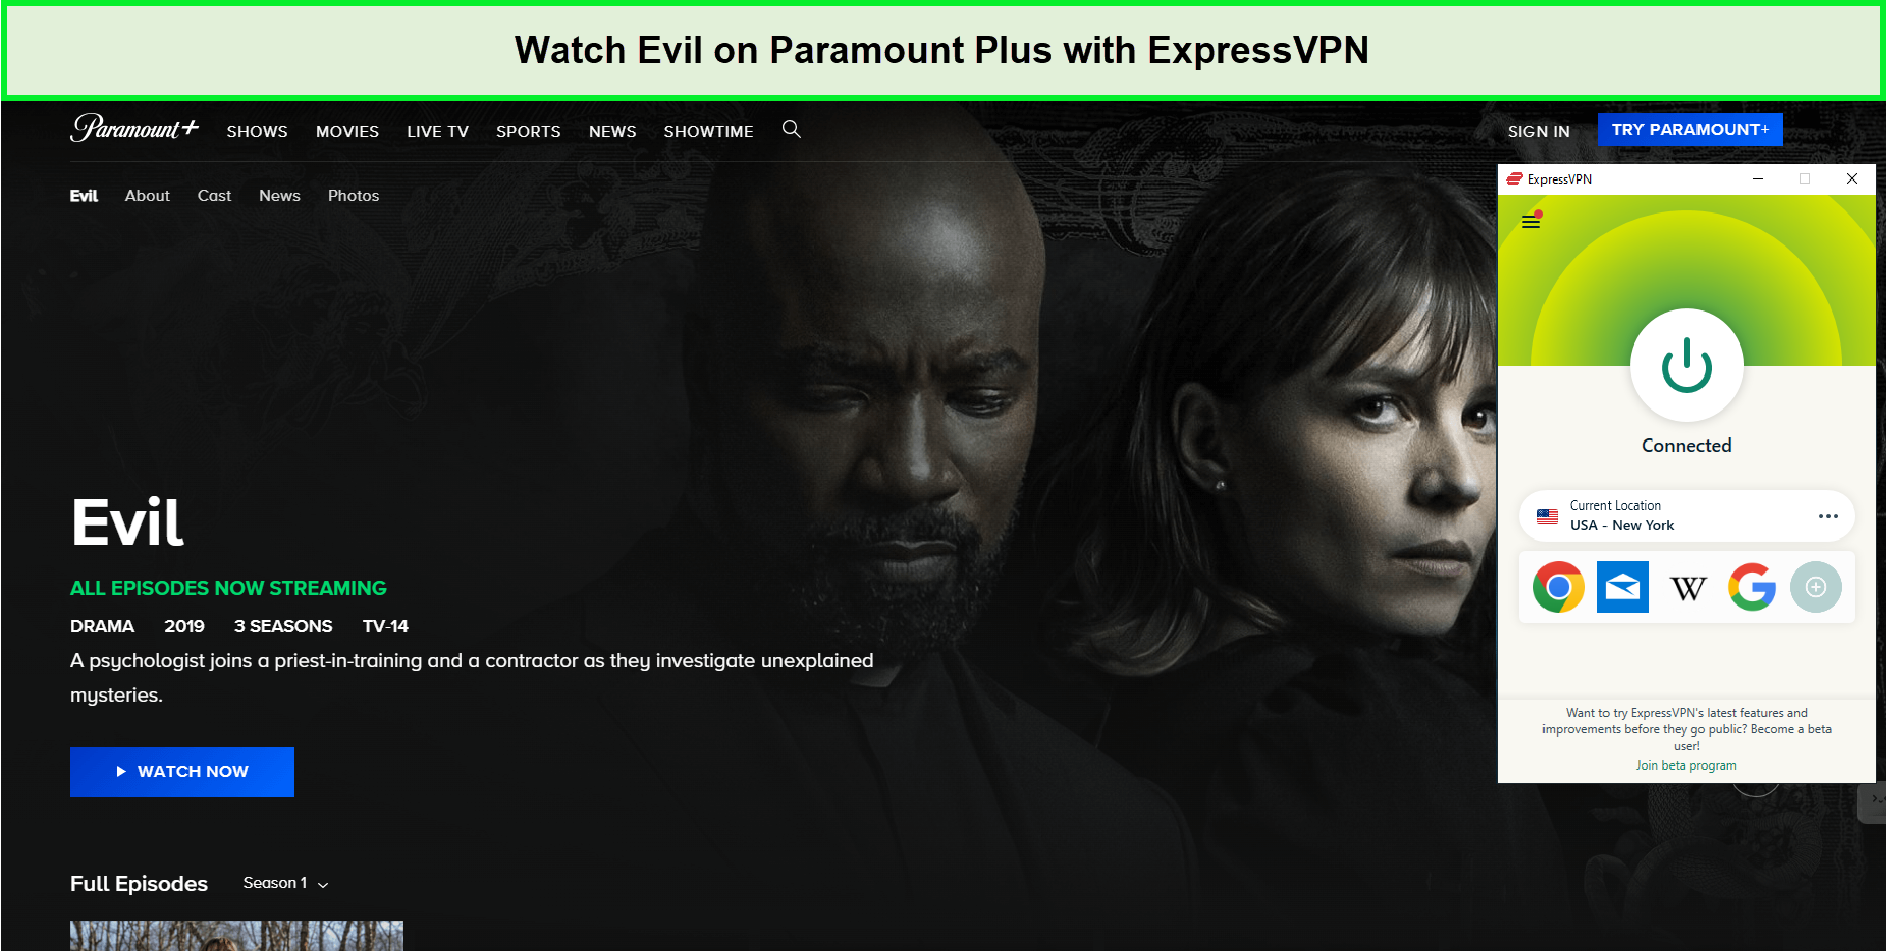 Watch-Evil-Season-4-in-Netherlands-on-Paramount-Plus-with-ExpressVPN